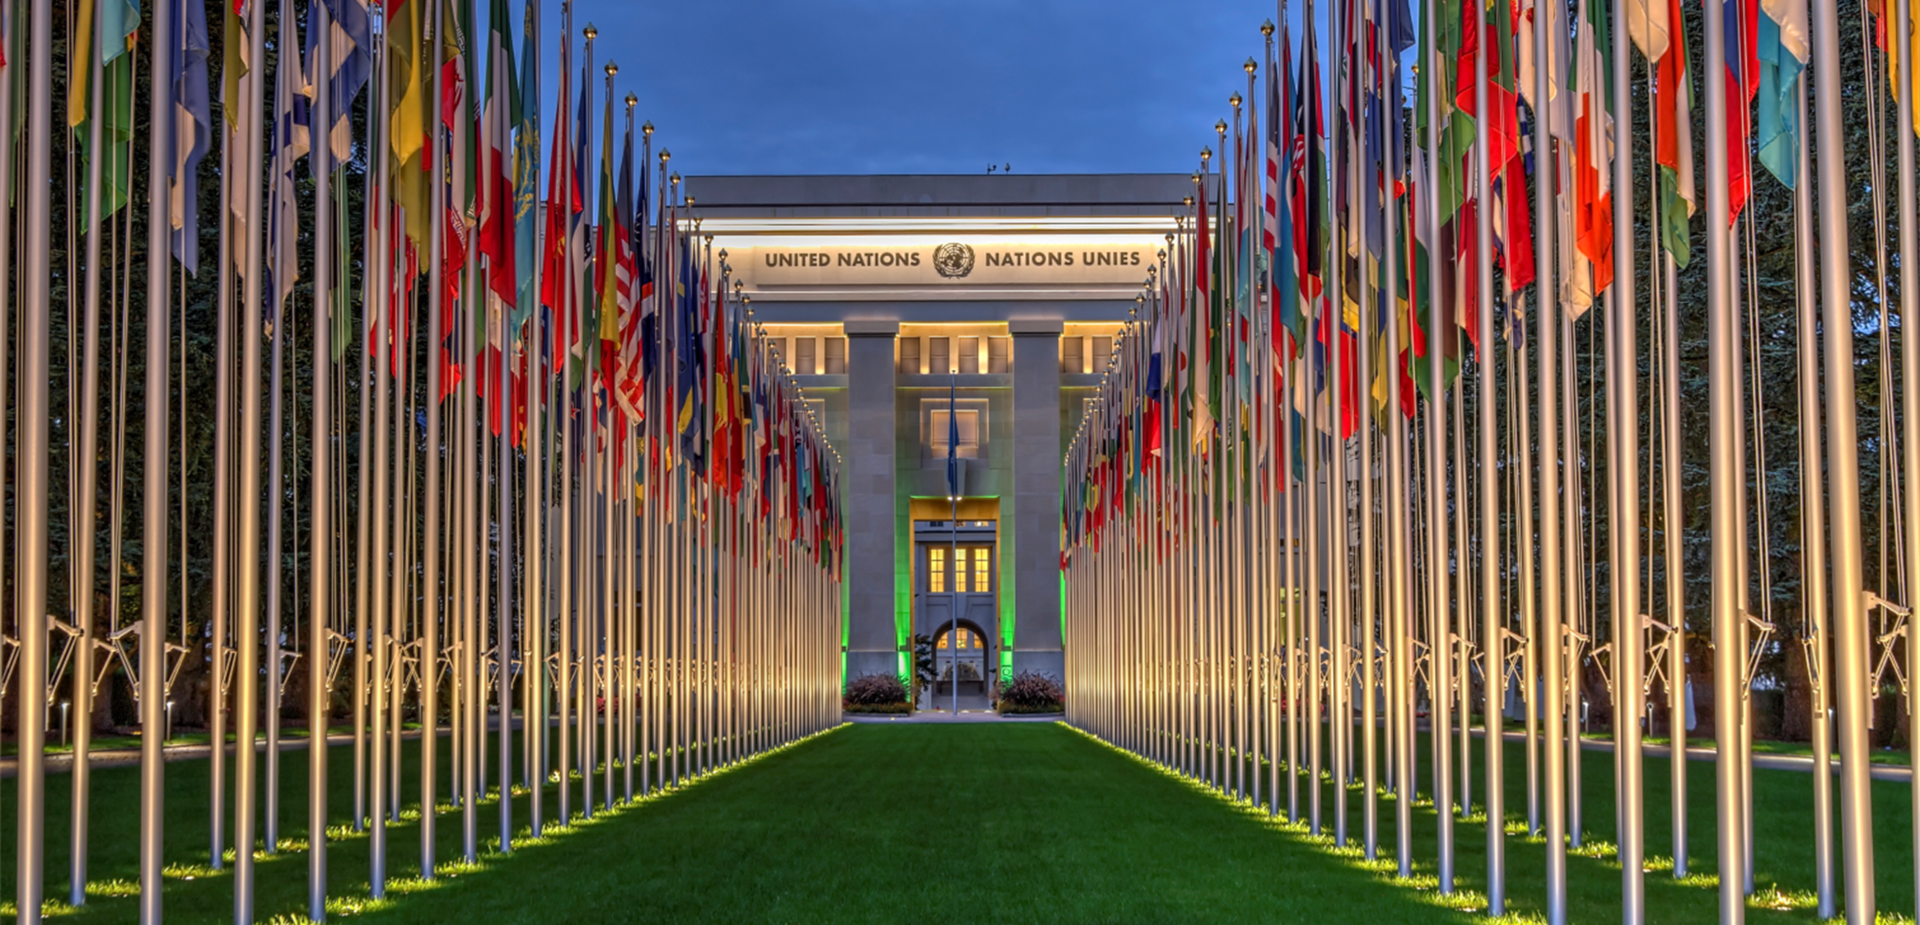 Image contains the UN building and flags 